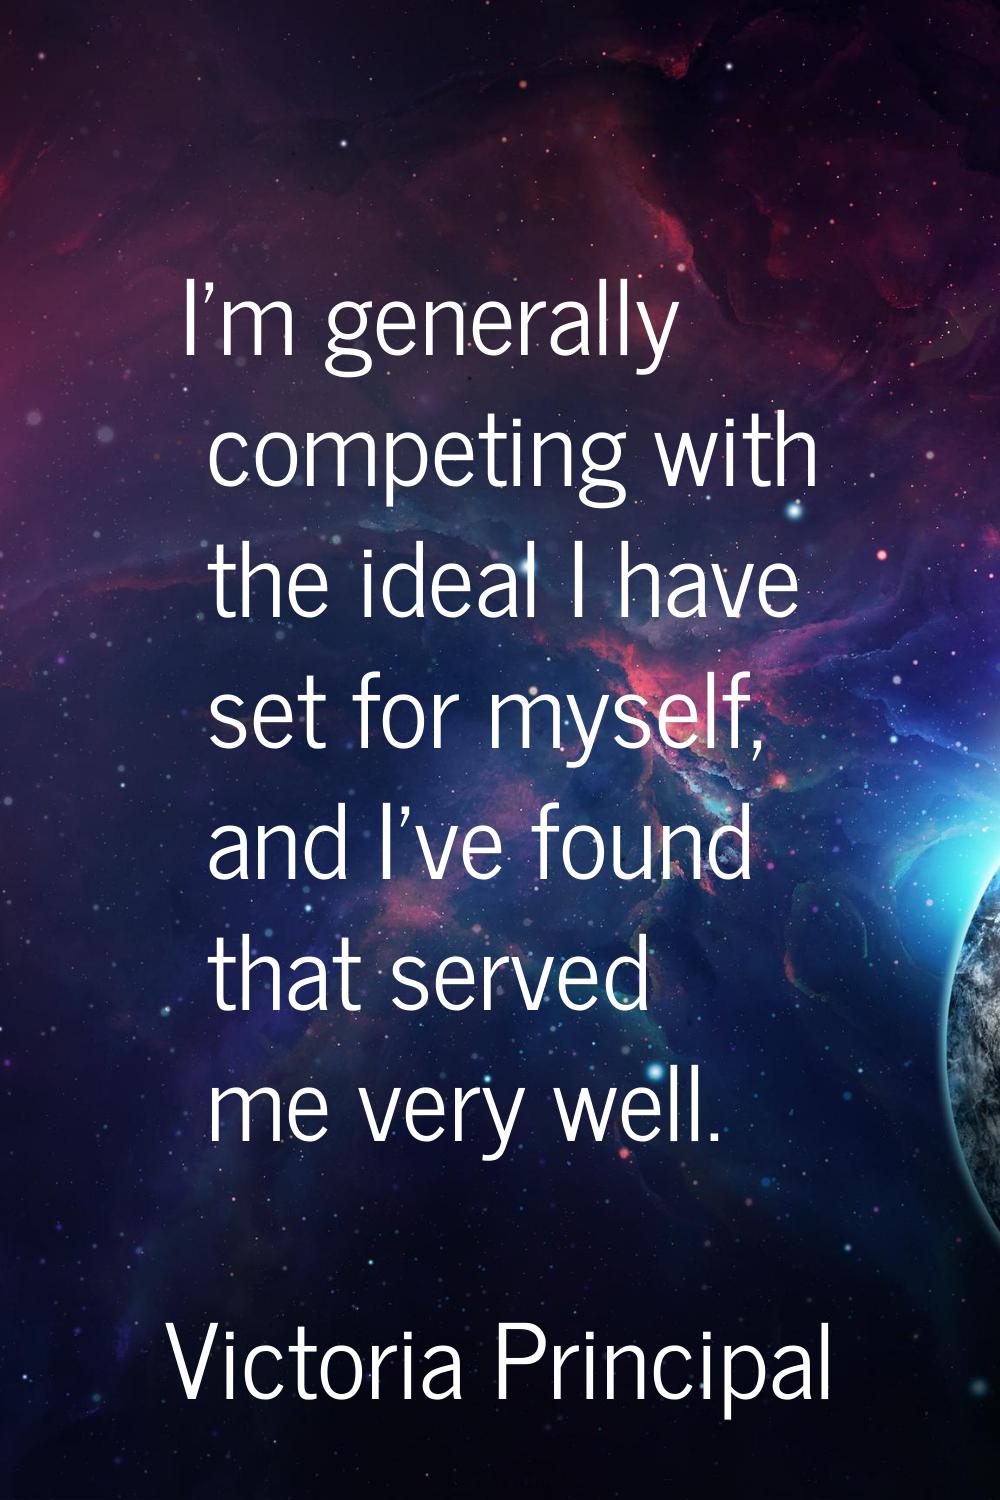 I'm generally competing with the ideal I have set for myself, and I've found that served me very we